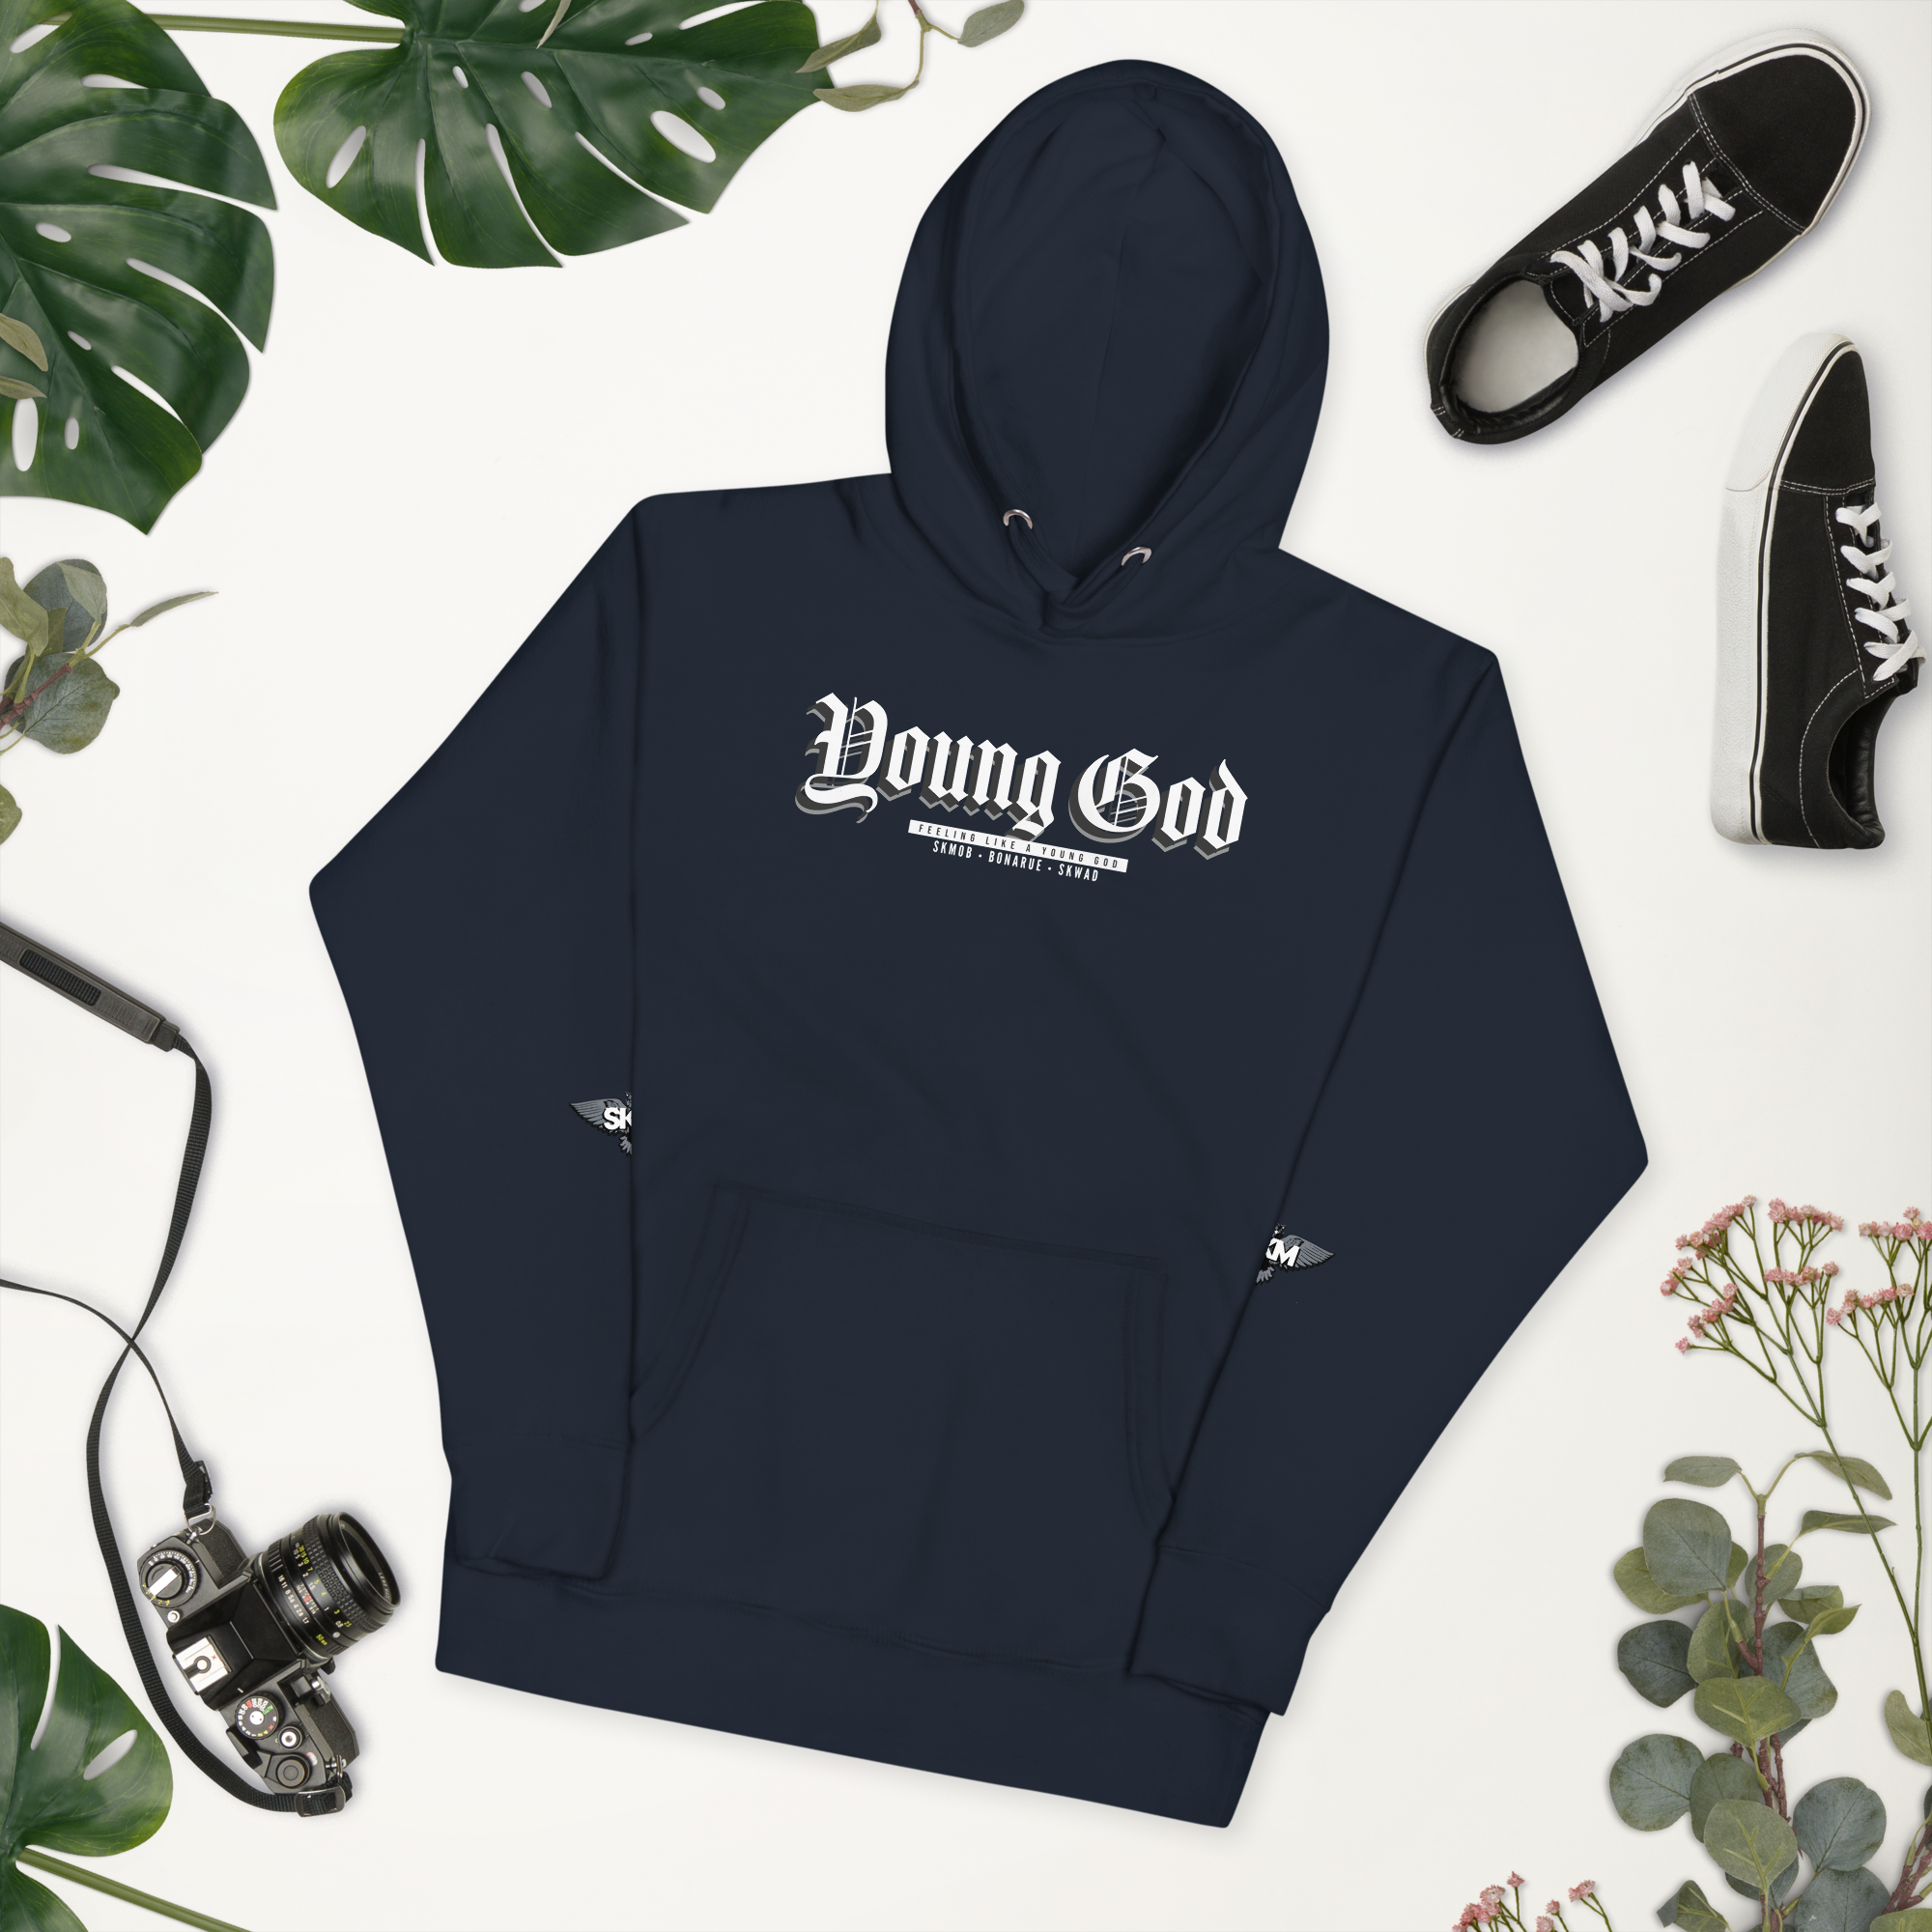 Young God Vol. 1 Hoodie